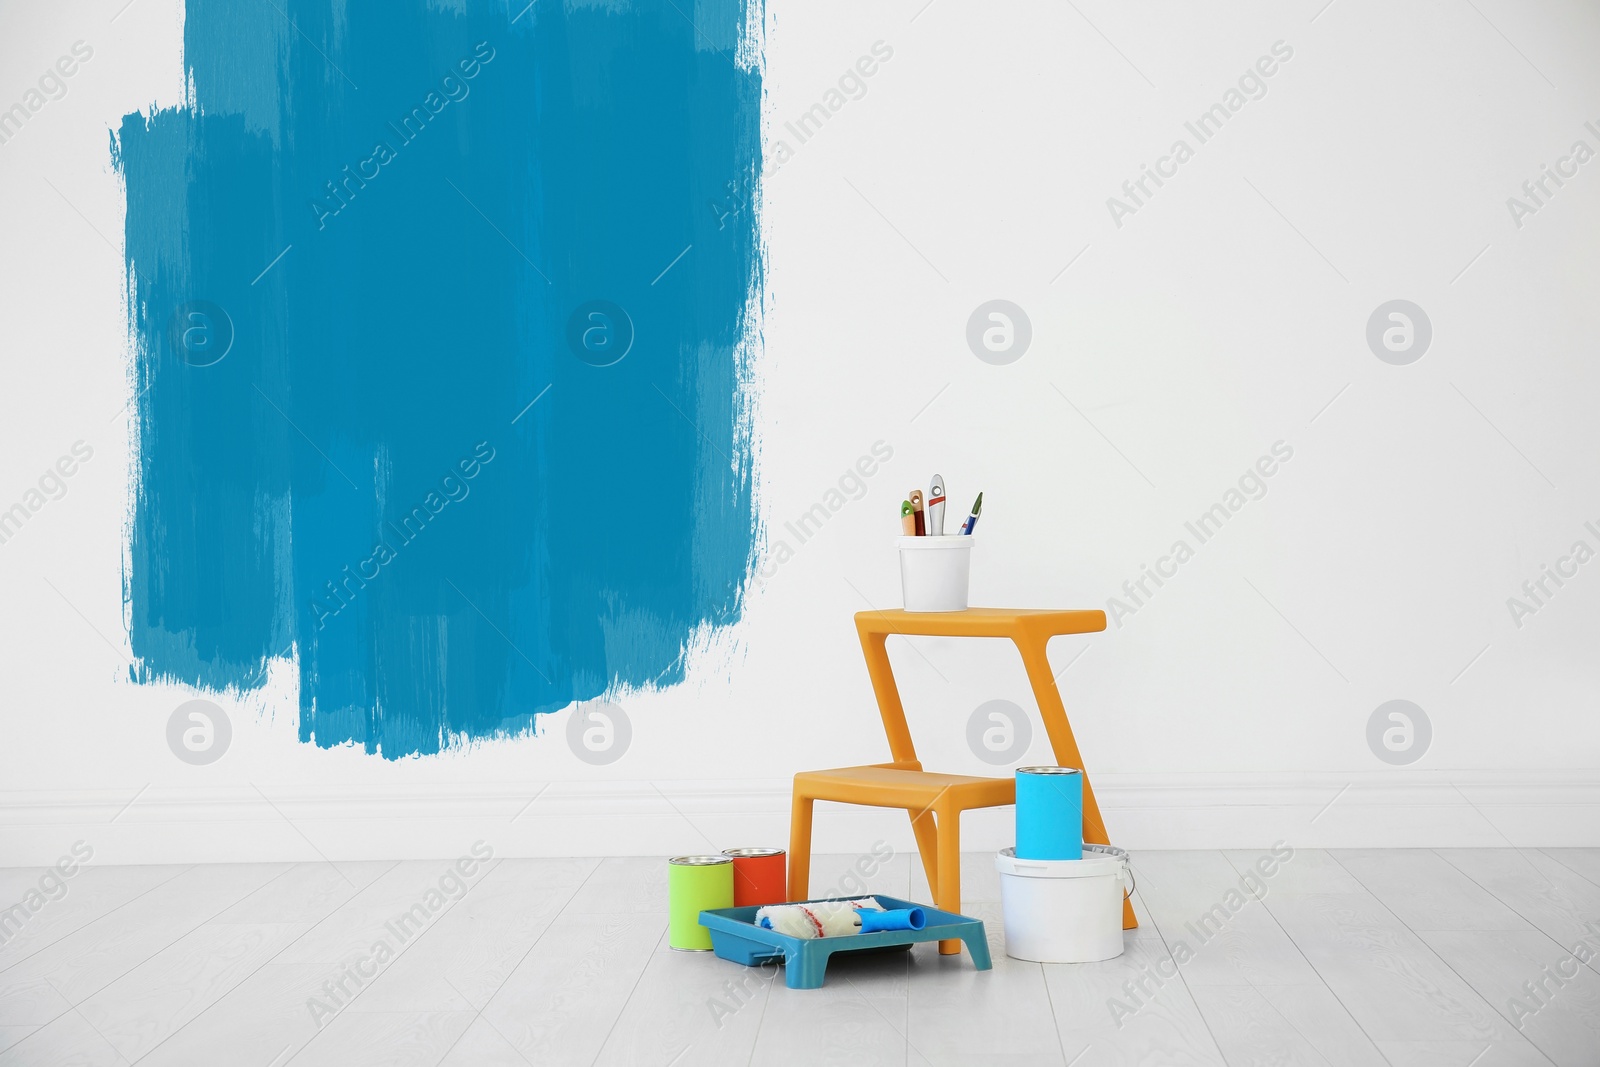 Image of Set with decorator's tools and paint on floor near white wall